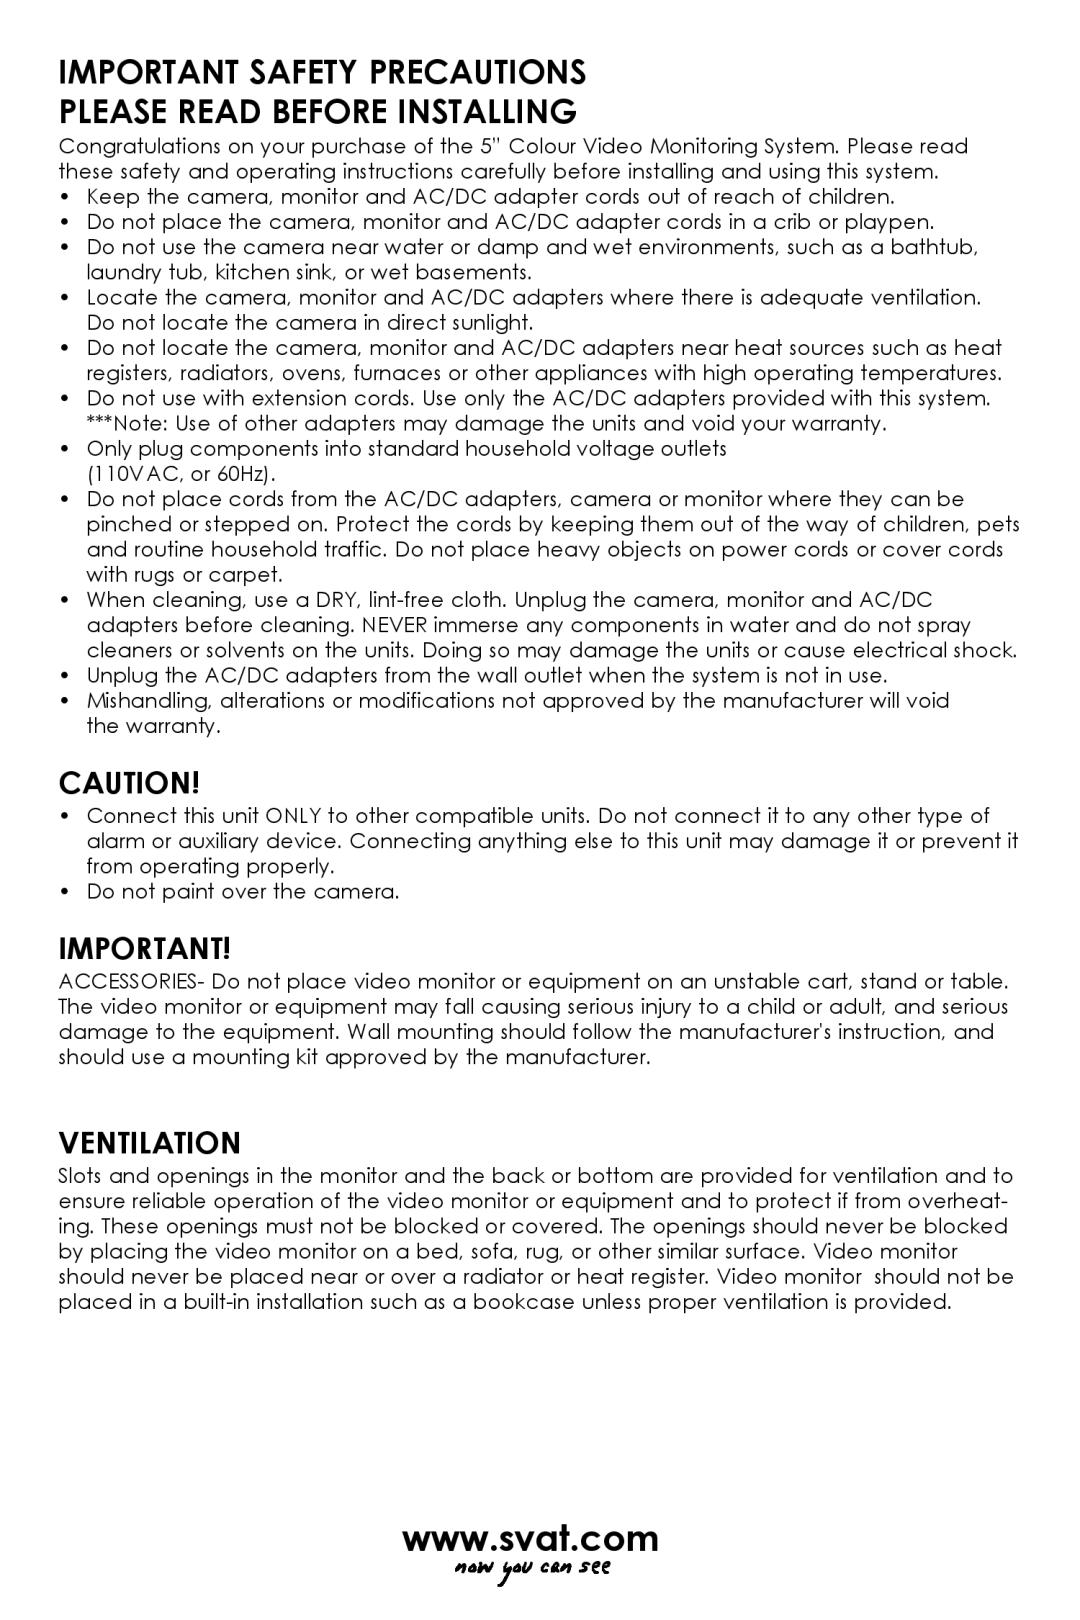 SVAT Electronics VISS7500 user manual Important Safety Precautions, Please Read Before Installing, Ventilation 